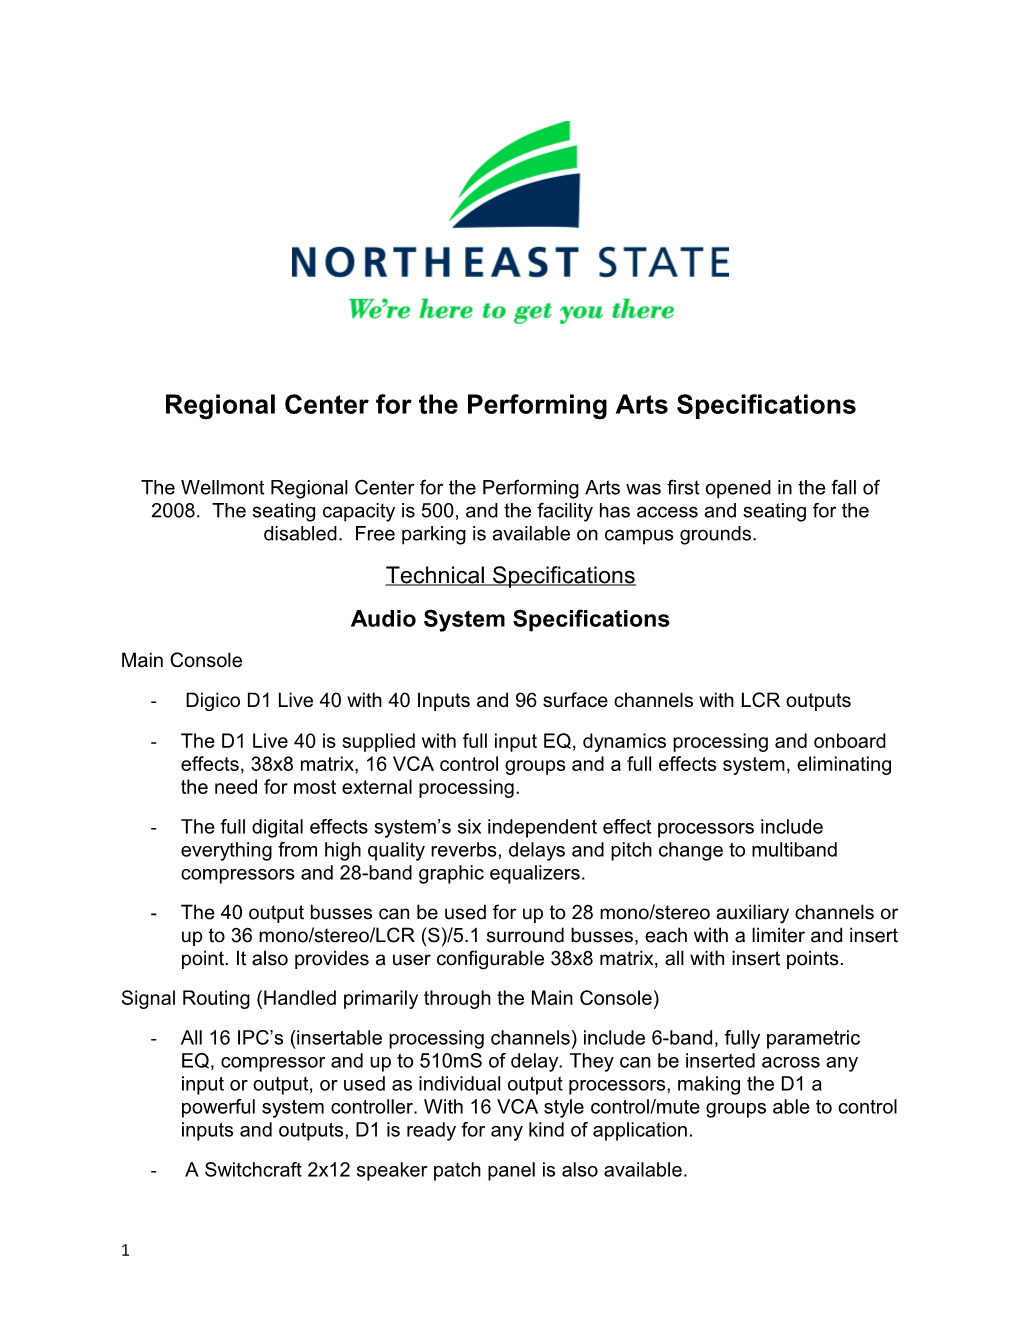 Regional Center for the Performing Arts Specifications